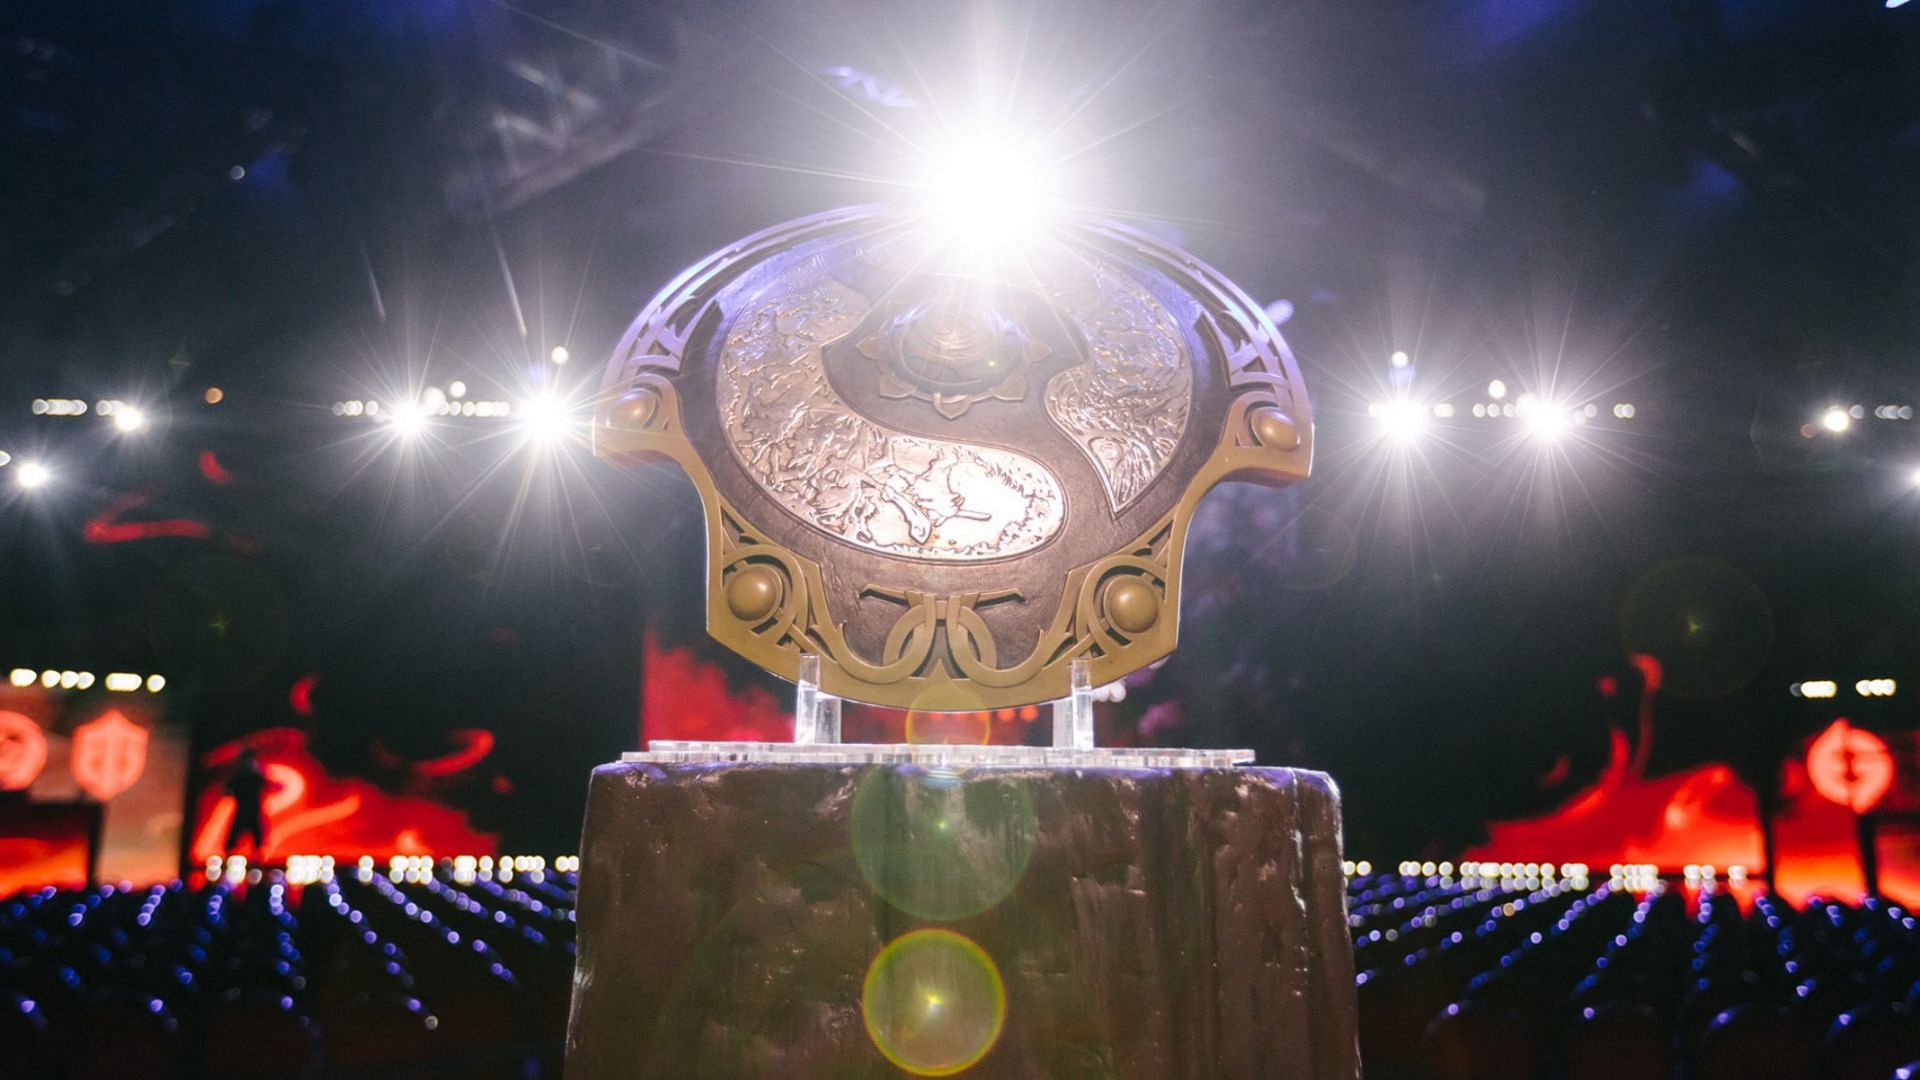 Dota 2 The International 11 finals Schedule, where to watch, and more